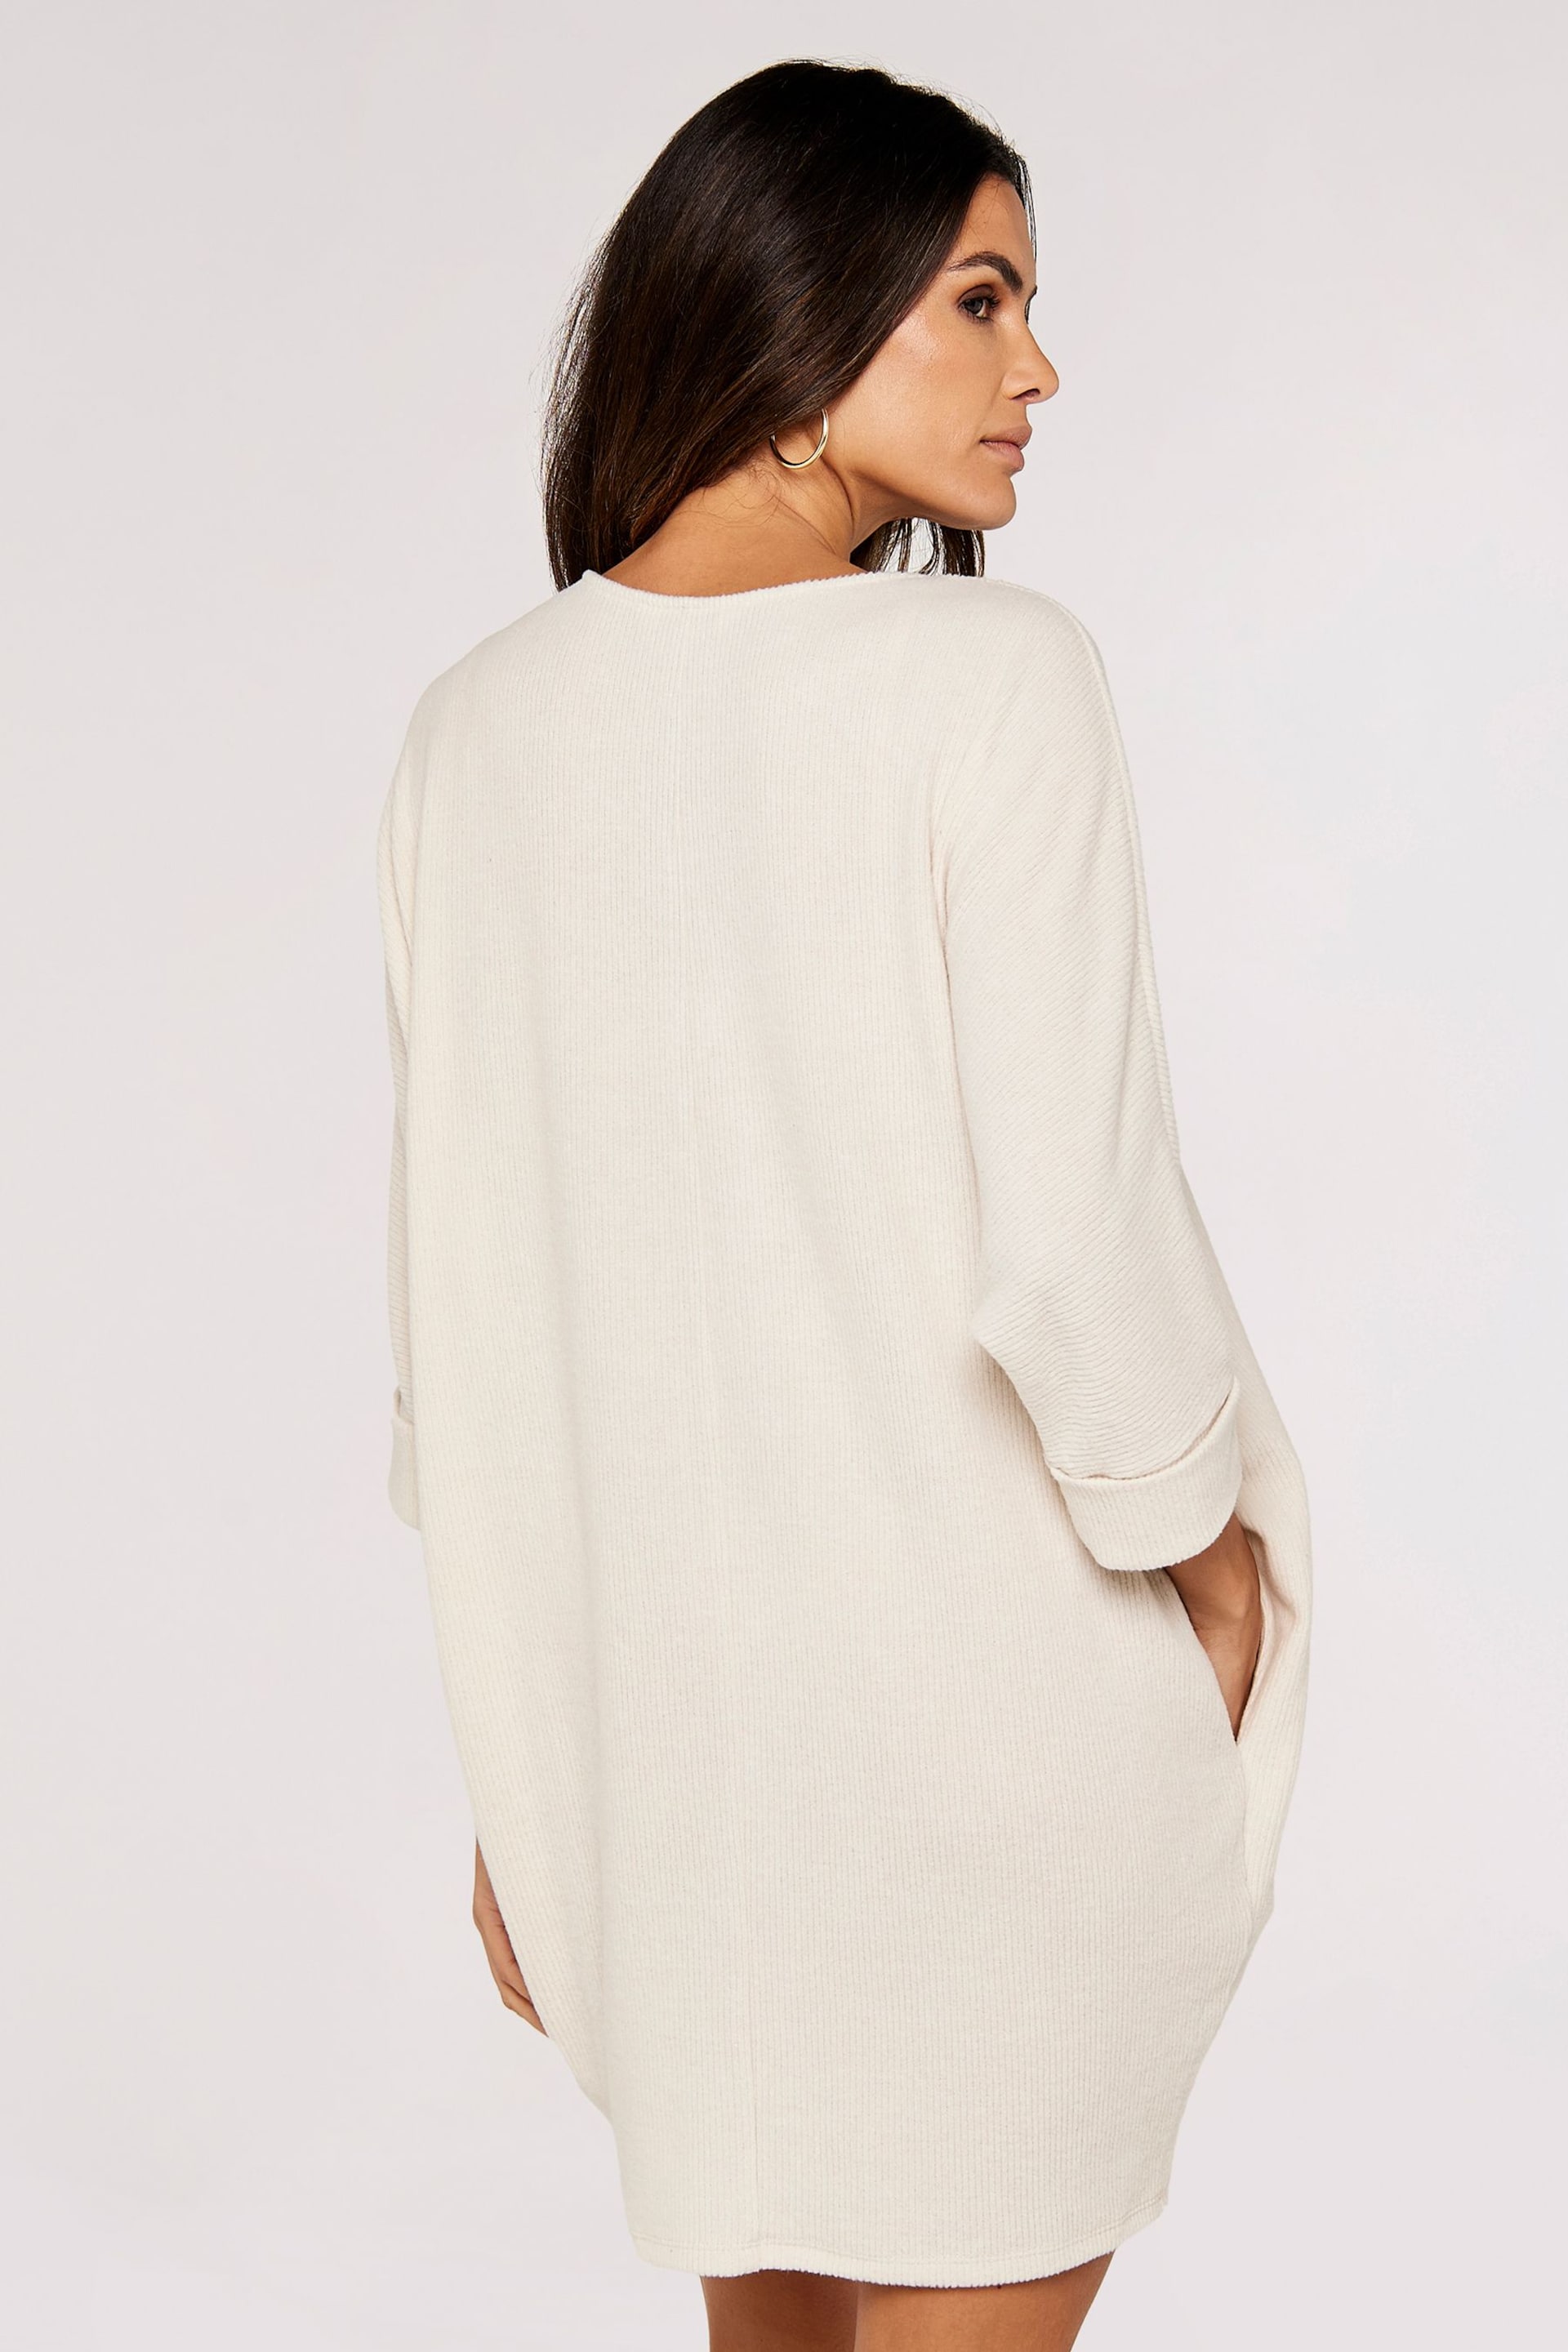 Apricot Neutral Soft Rib Cocoon Dress - Image 2 of 4